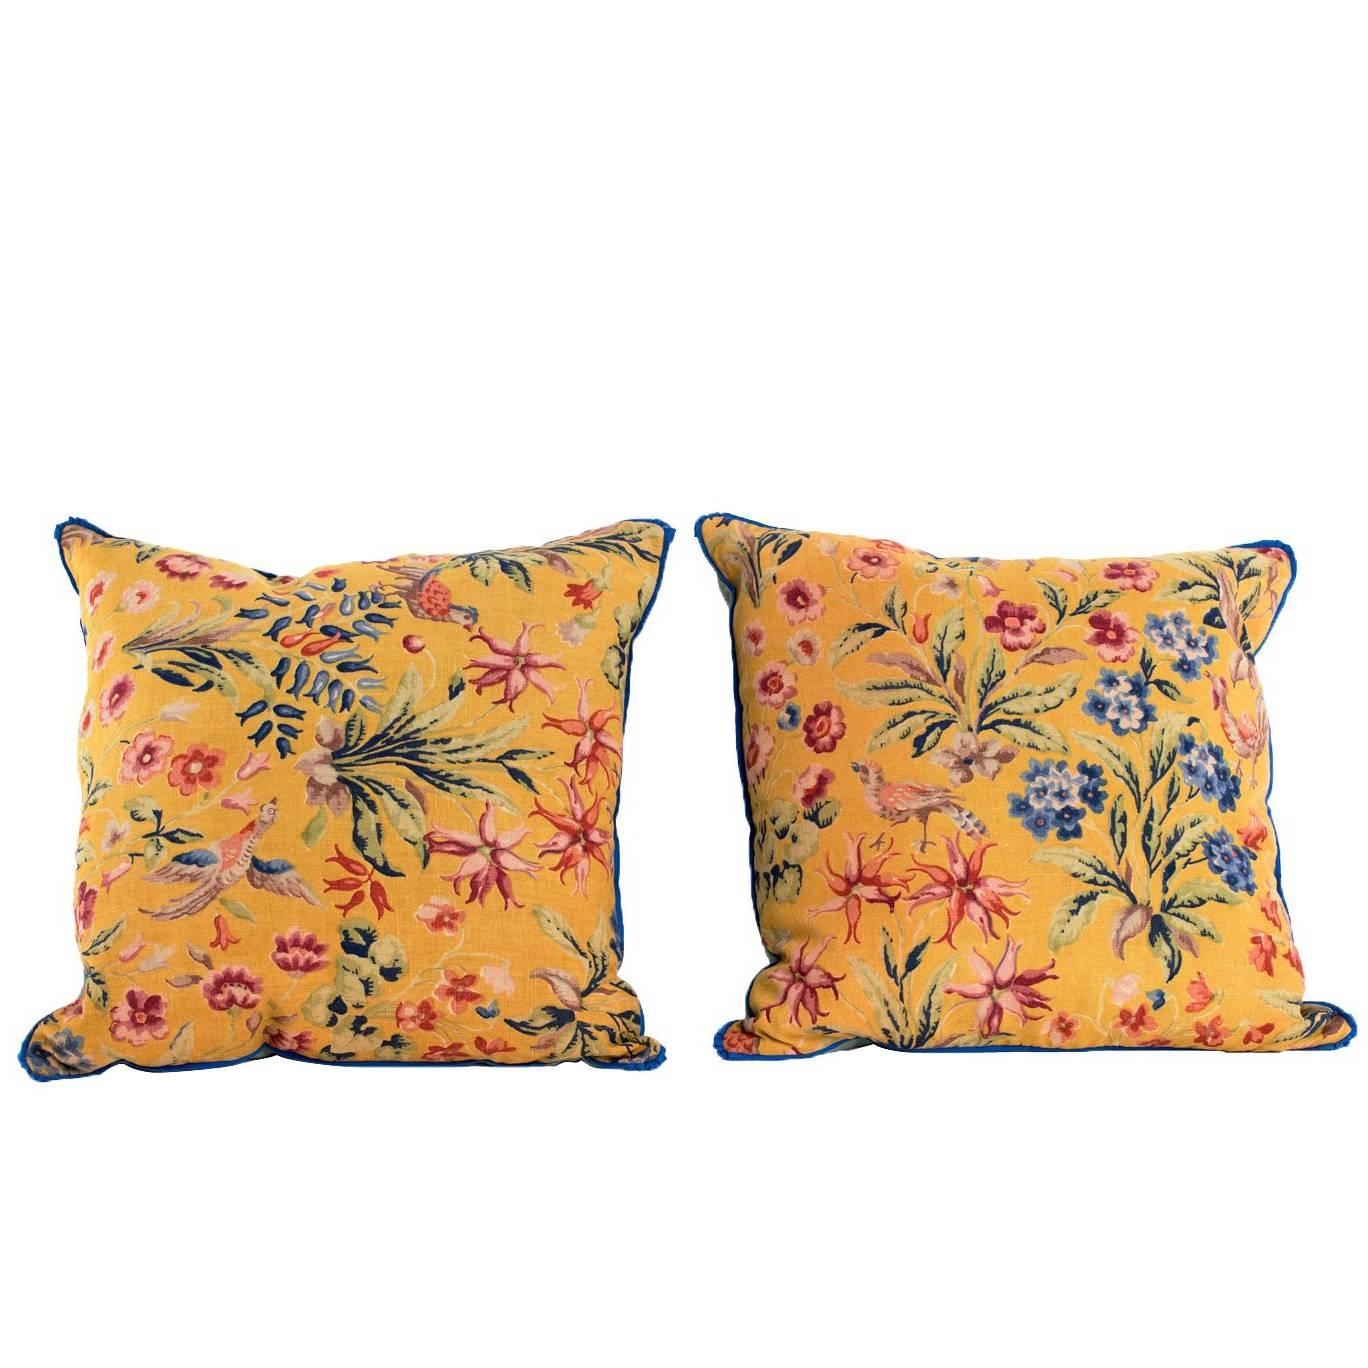 Decorative Pillows in Vintage English Fabric For Sale